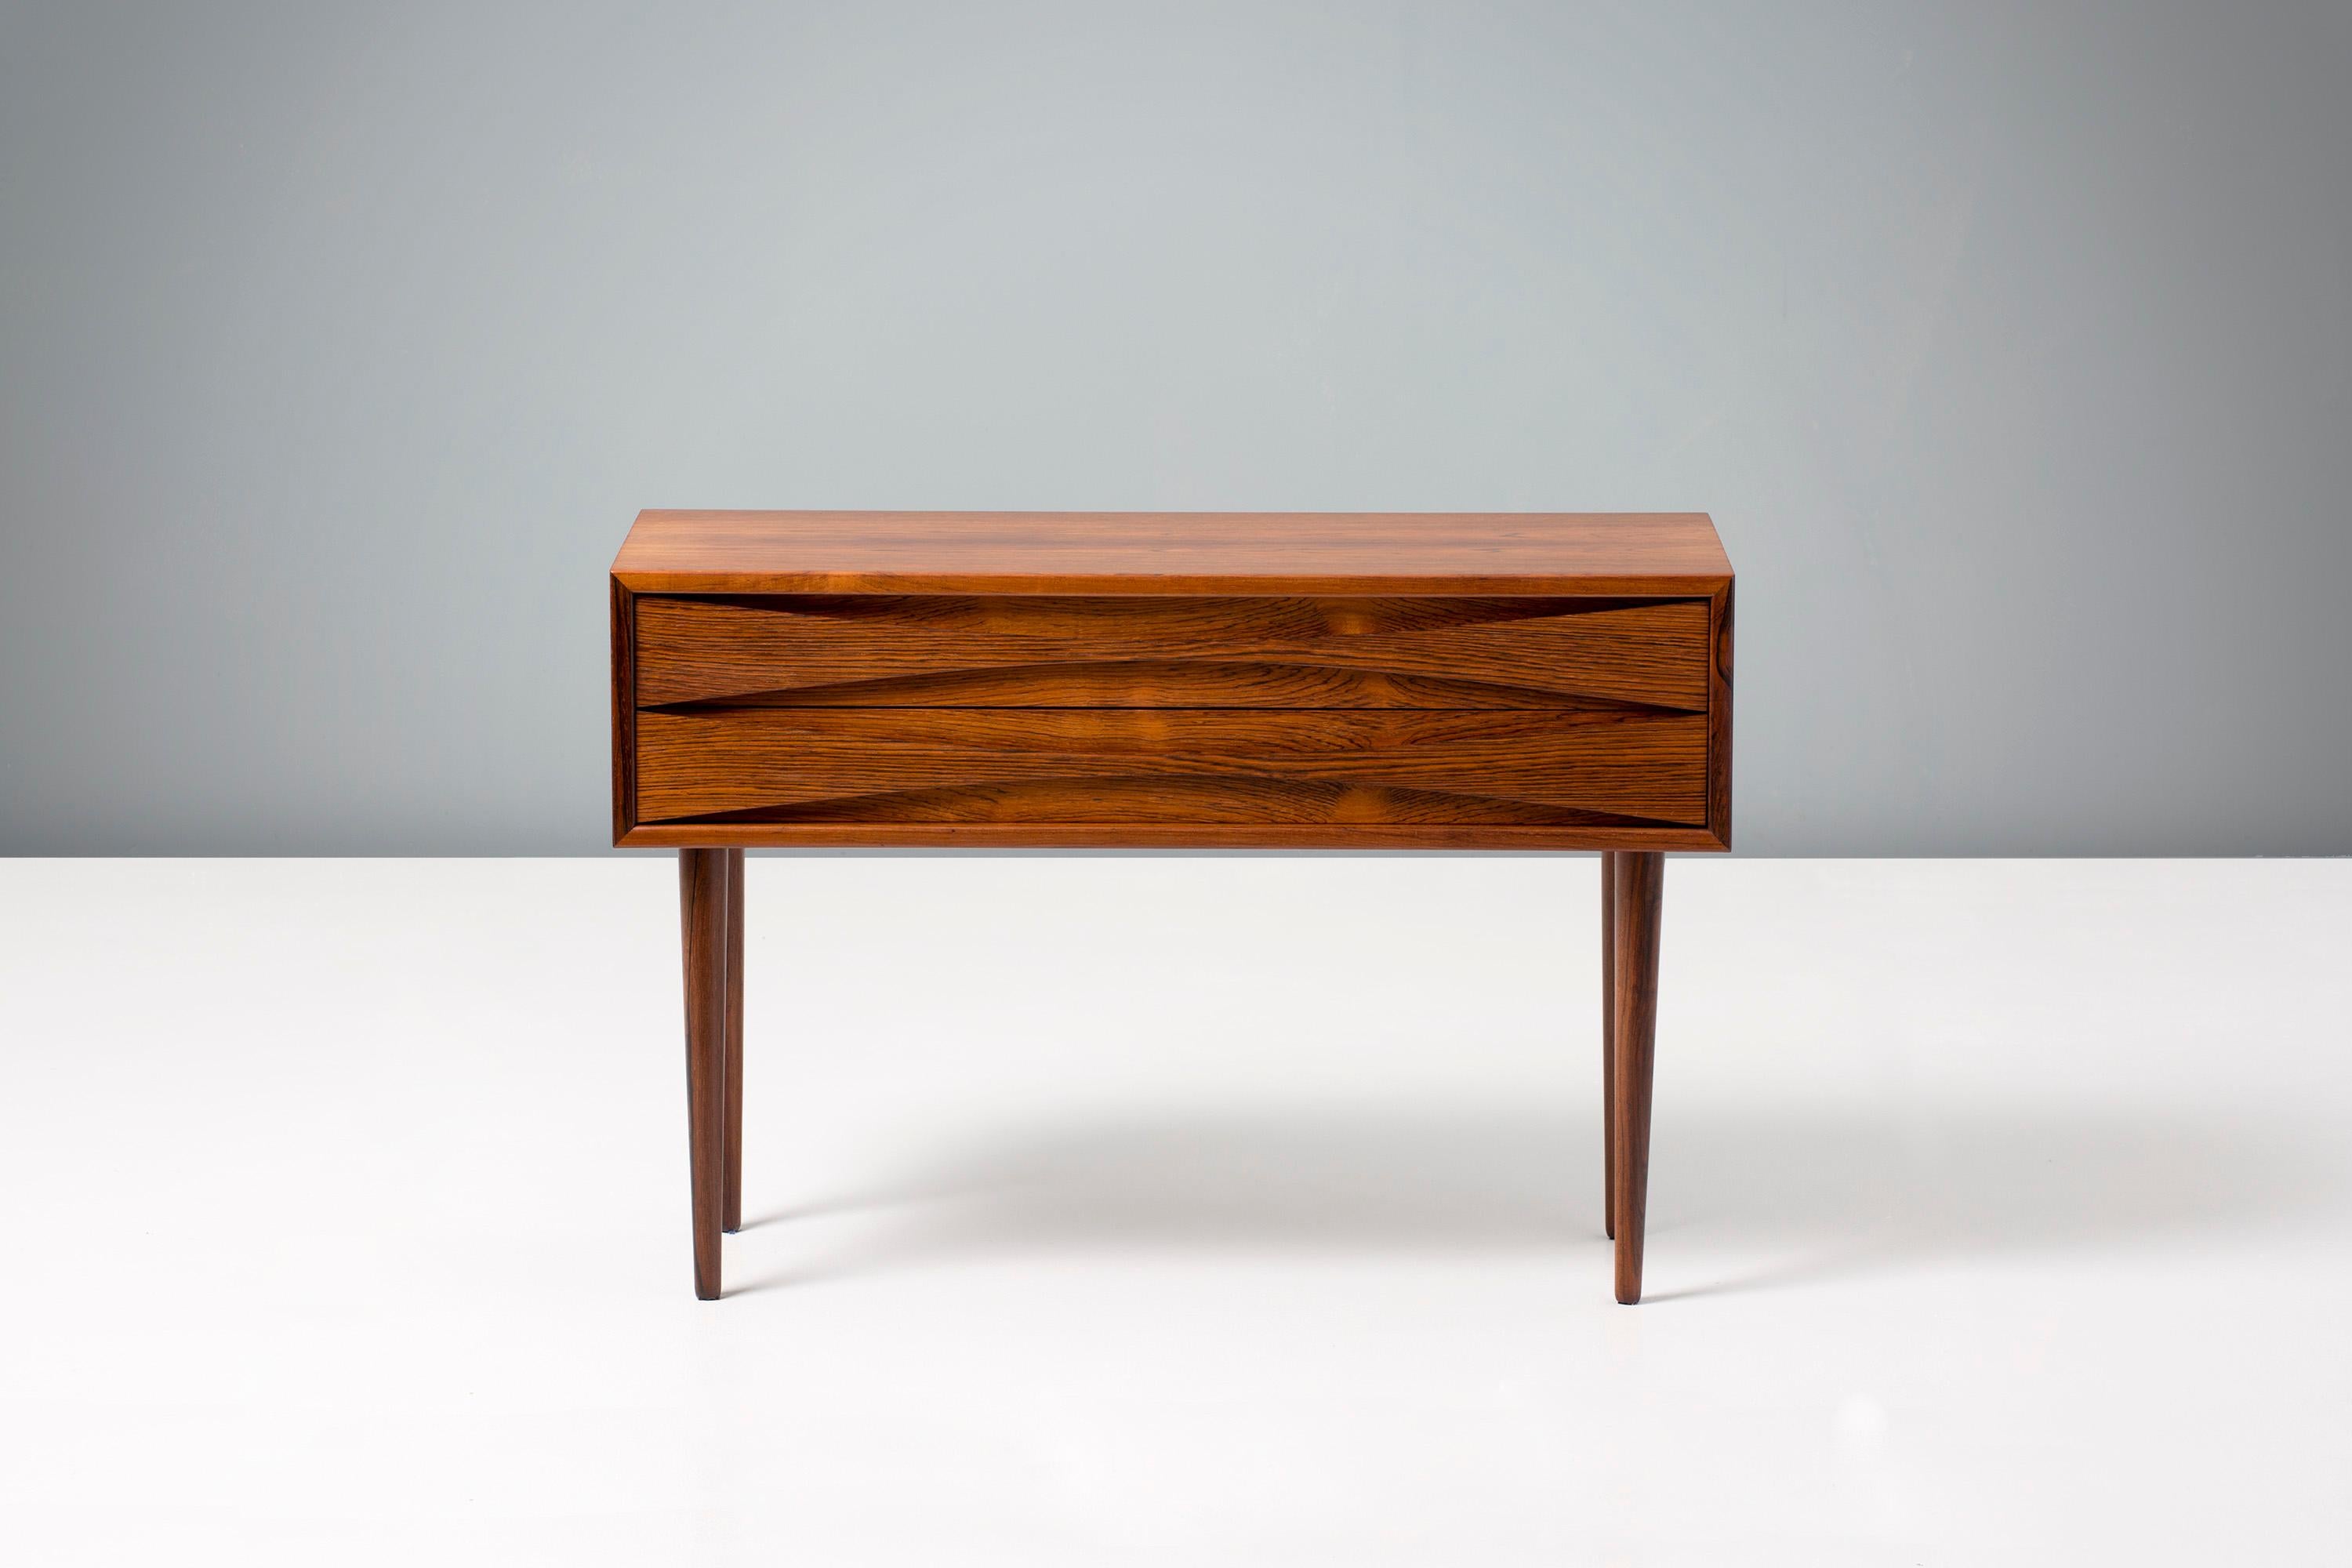 Niels Clausen

Rosewood bedside cabinet, circa 1960

Rosewood cabinet by Niels Clausen for NC Mobler, Odense, Denmark. Produced, circa 1960. Two drawers with scalloped pulls and solid tapered legs.
    